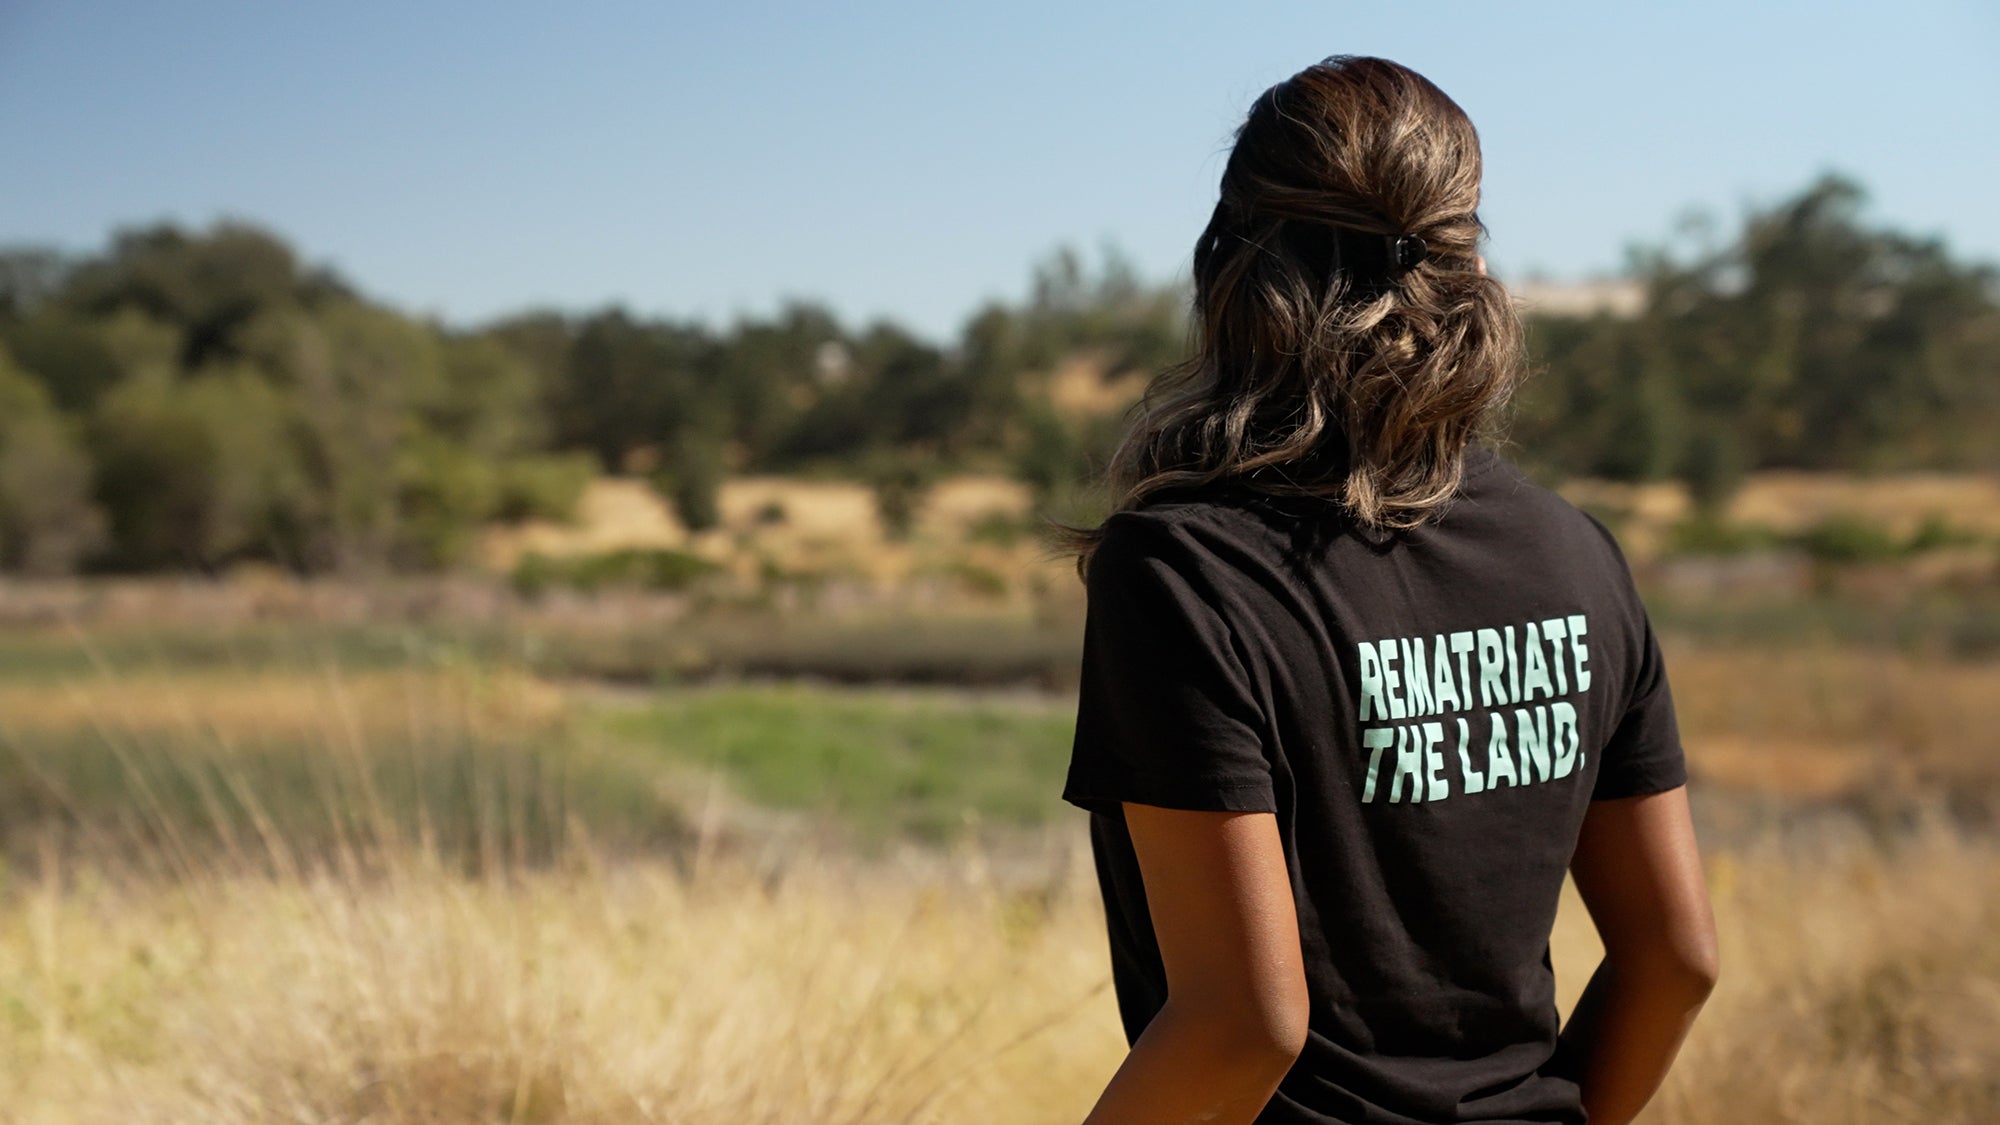 Back of Native American woman looking toward field. Back of her shirt says "Rematriate the Land."